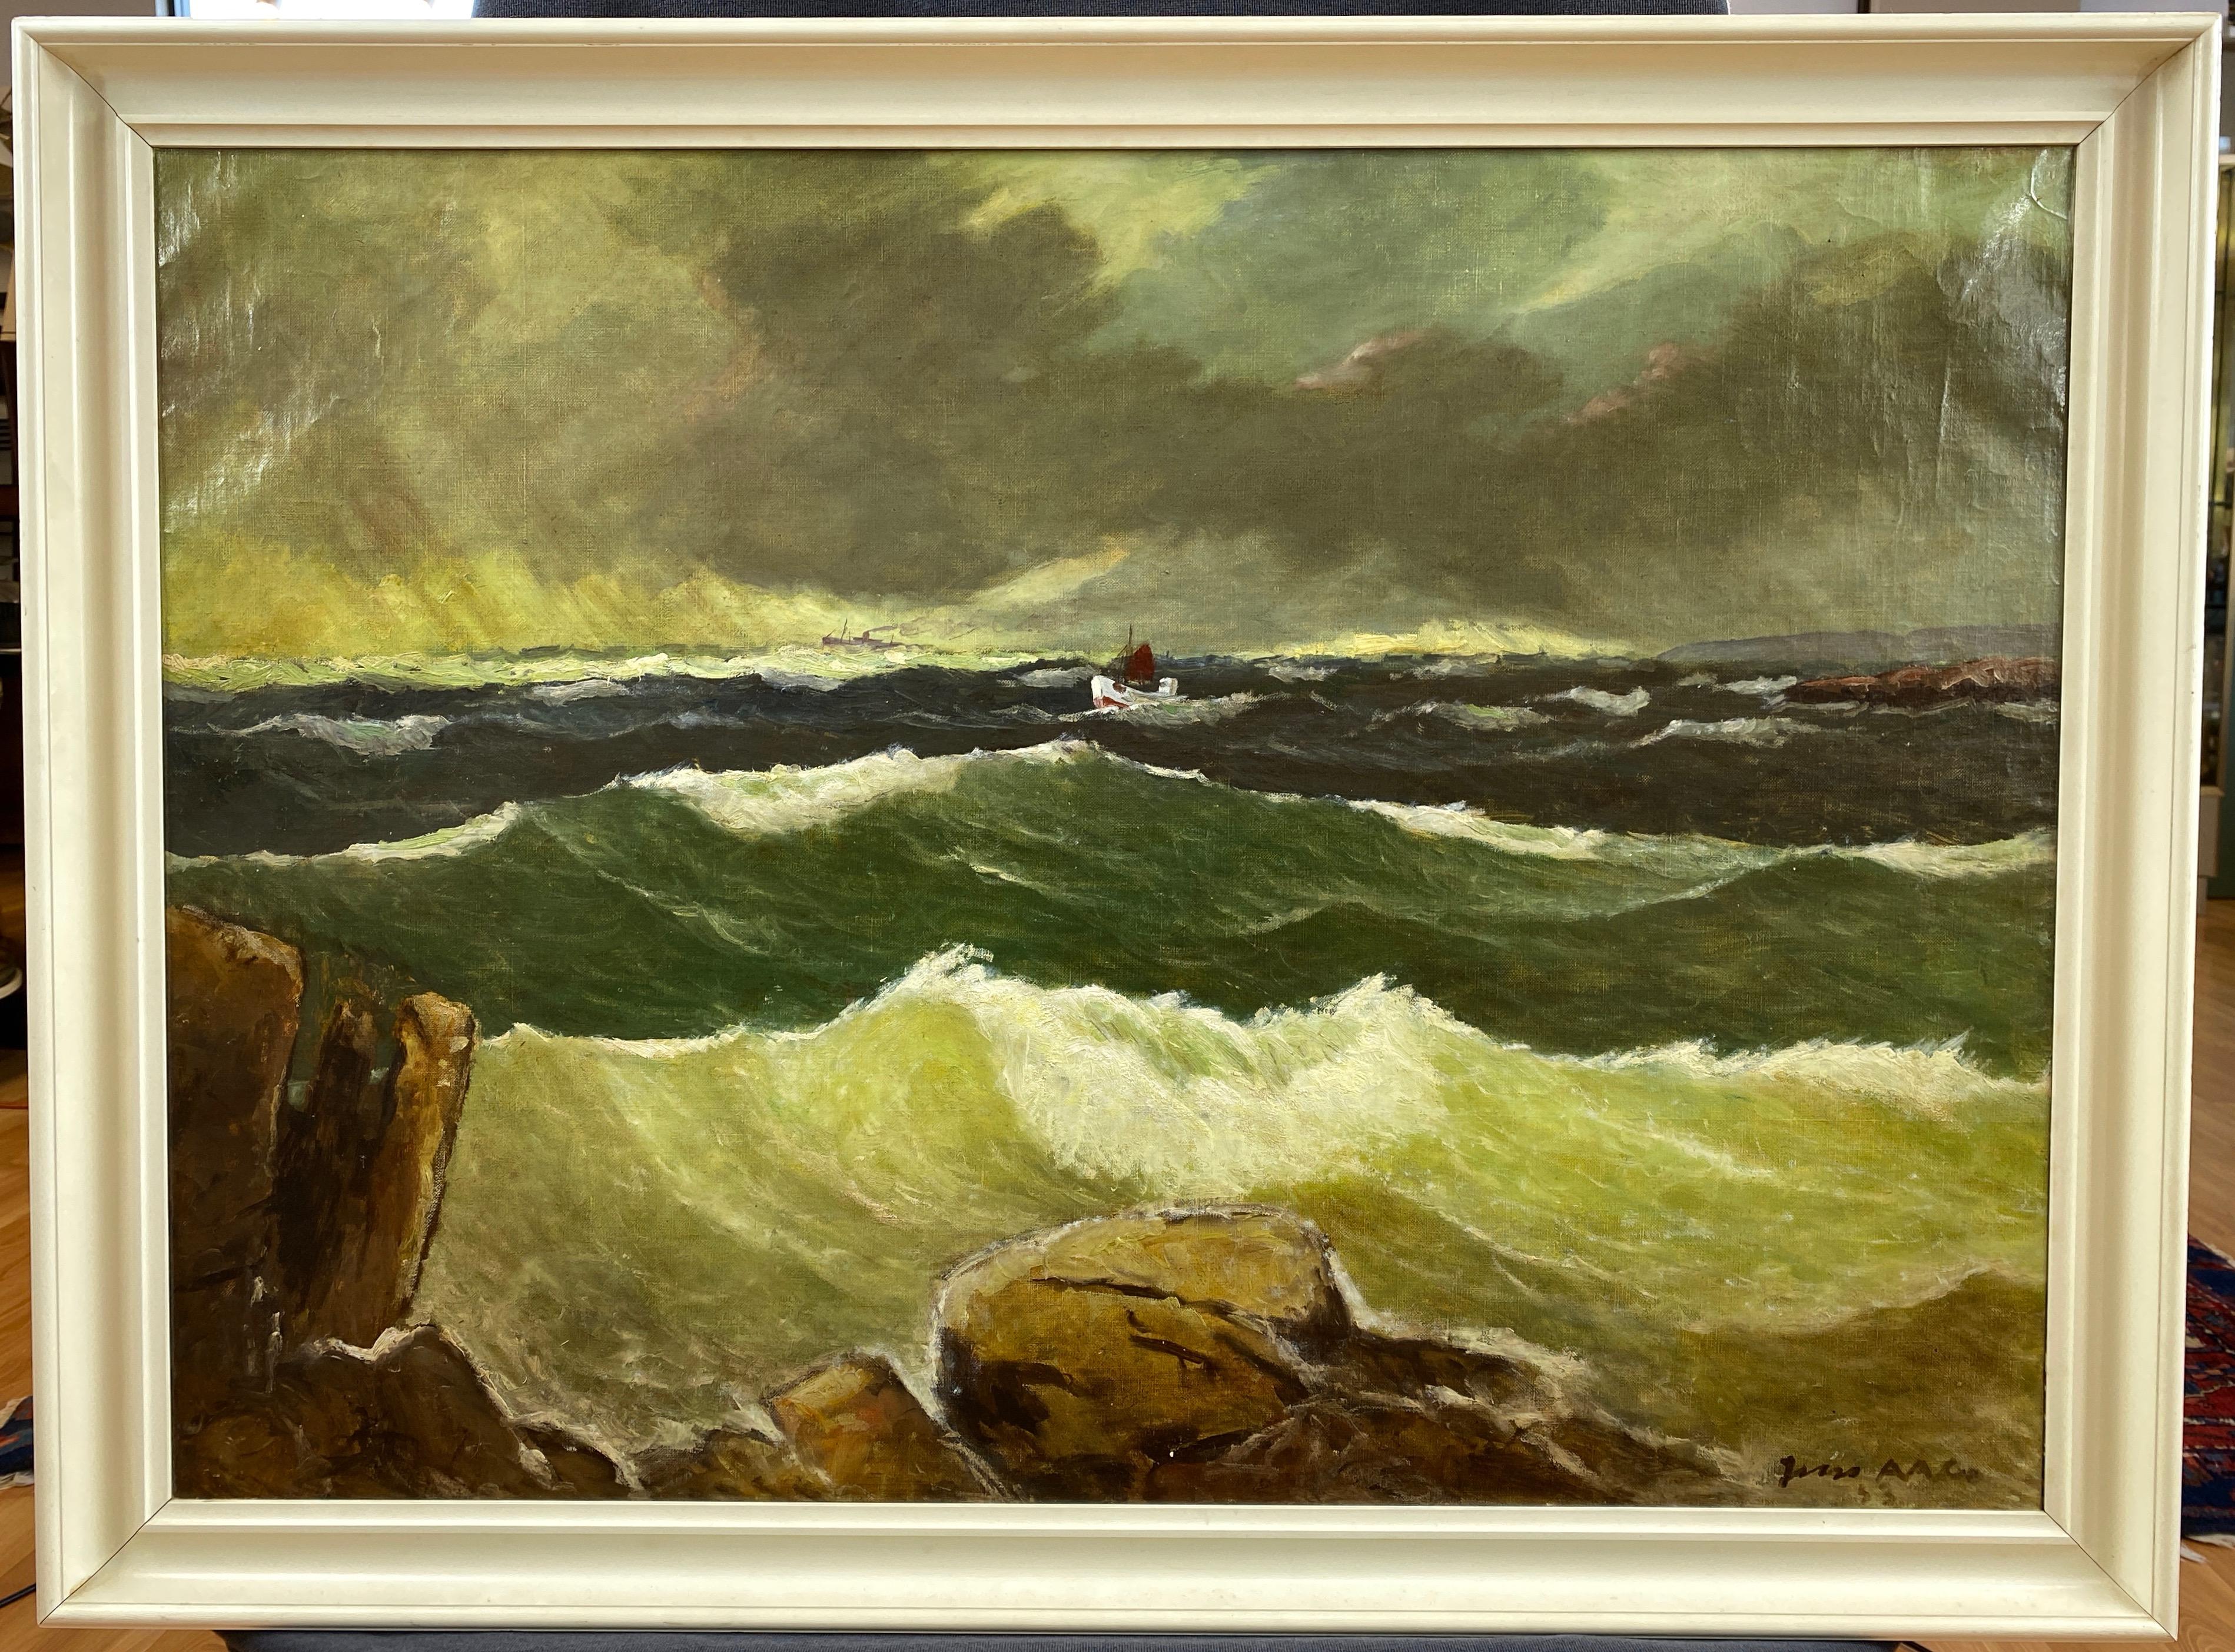 A 1953 oil painting of a stormy coastal sea by Jens Aabo, who was born in 1898 on the small Danish island of Bornholm.

Atmospheric scene depicts a tiny sailboat as it bobs in waves crashing against a rocky shore, while a steamer ship on the